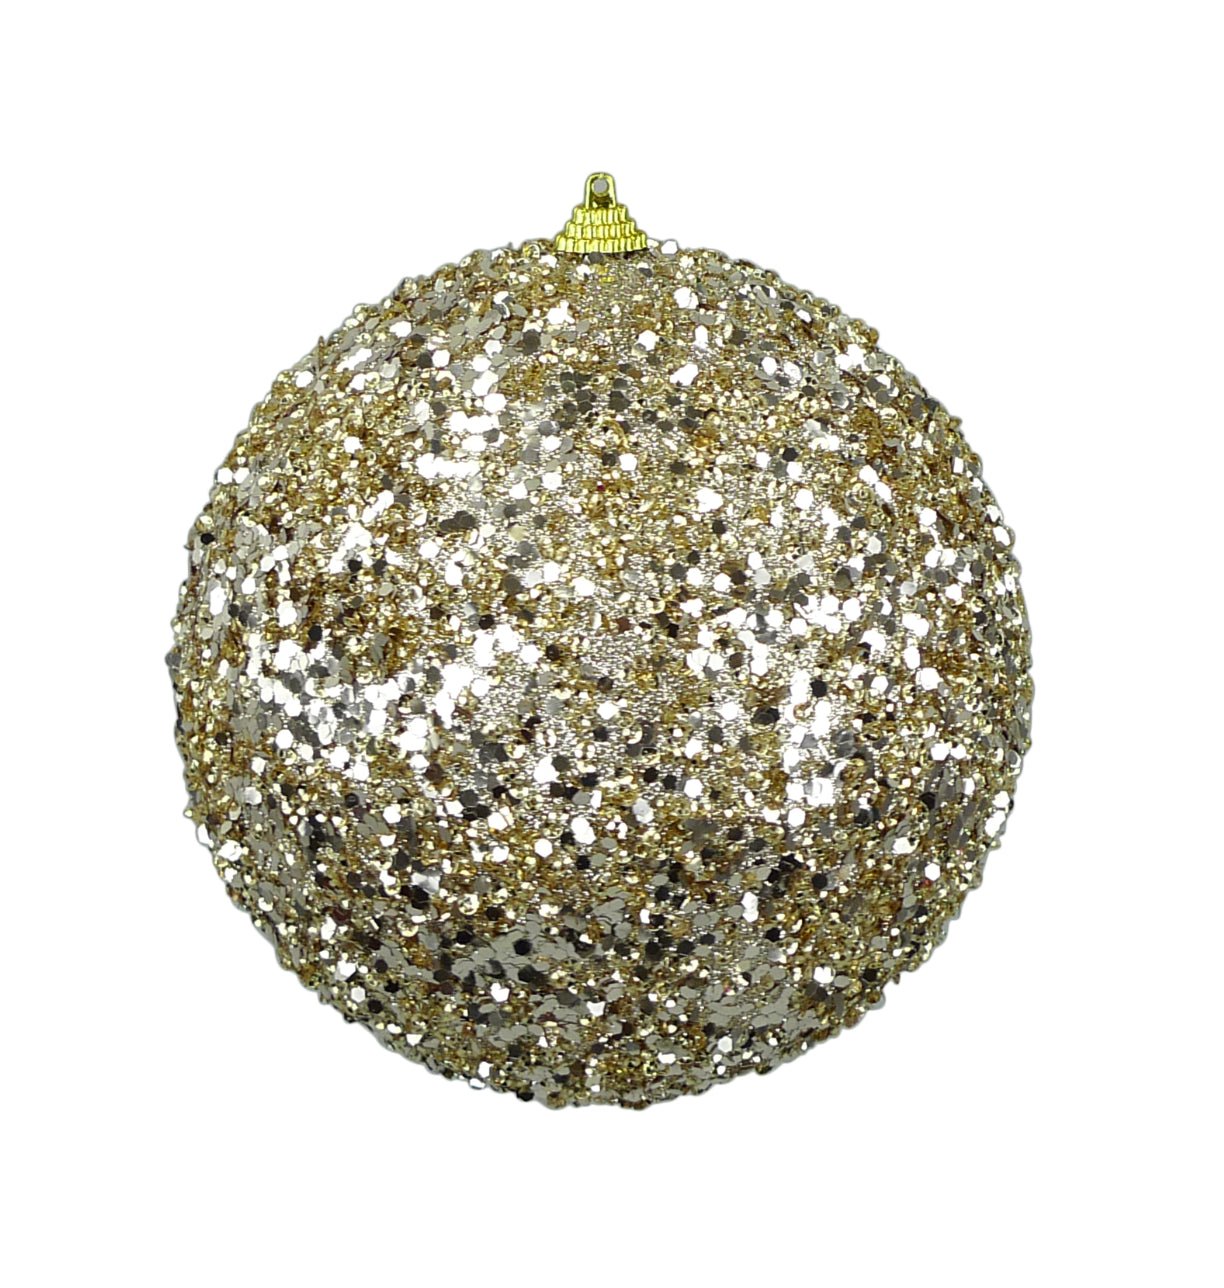 Large 6” Champagne sequins ball ornaments - Greenery MarketOrnaments84671CH